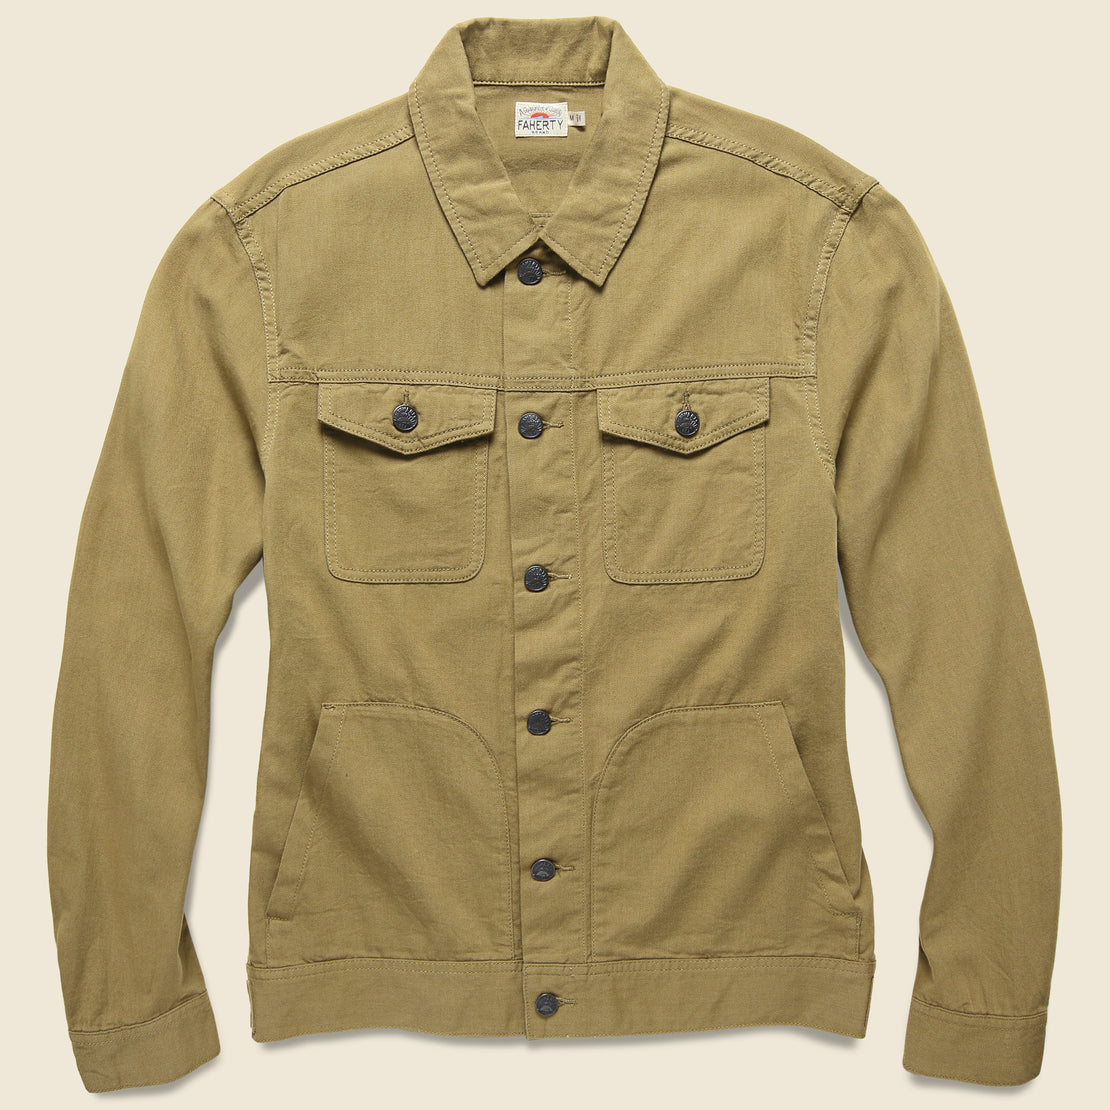 Faherty Route 80 Jacket - Weir Brown